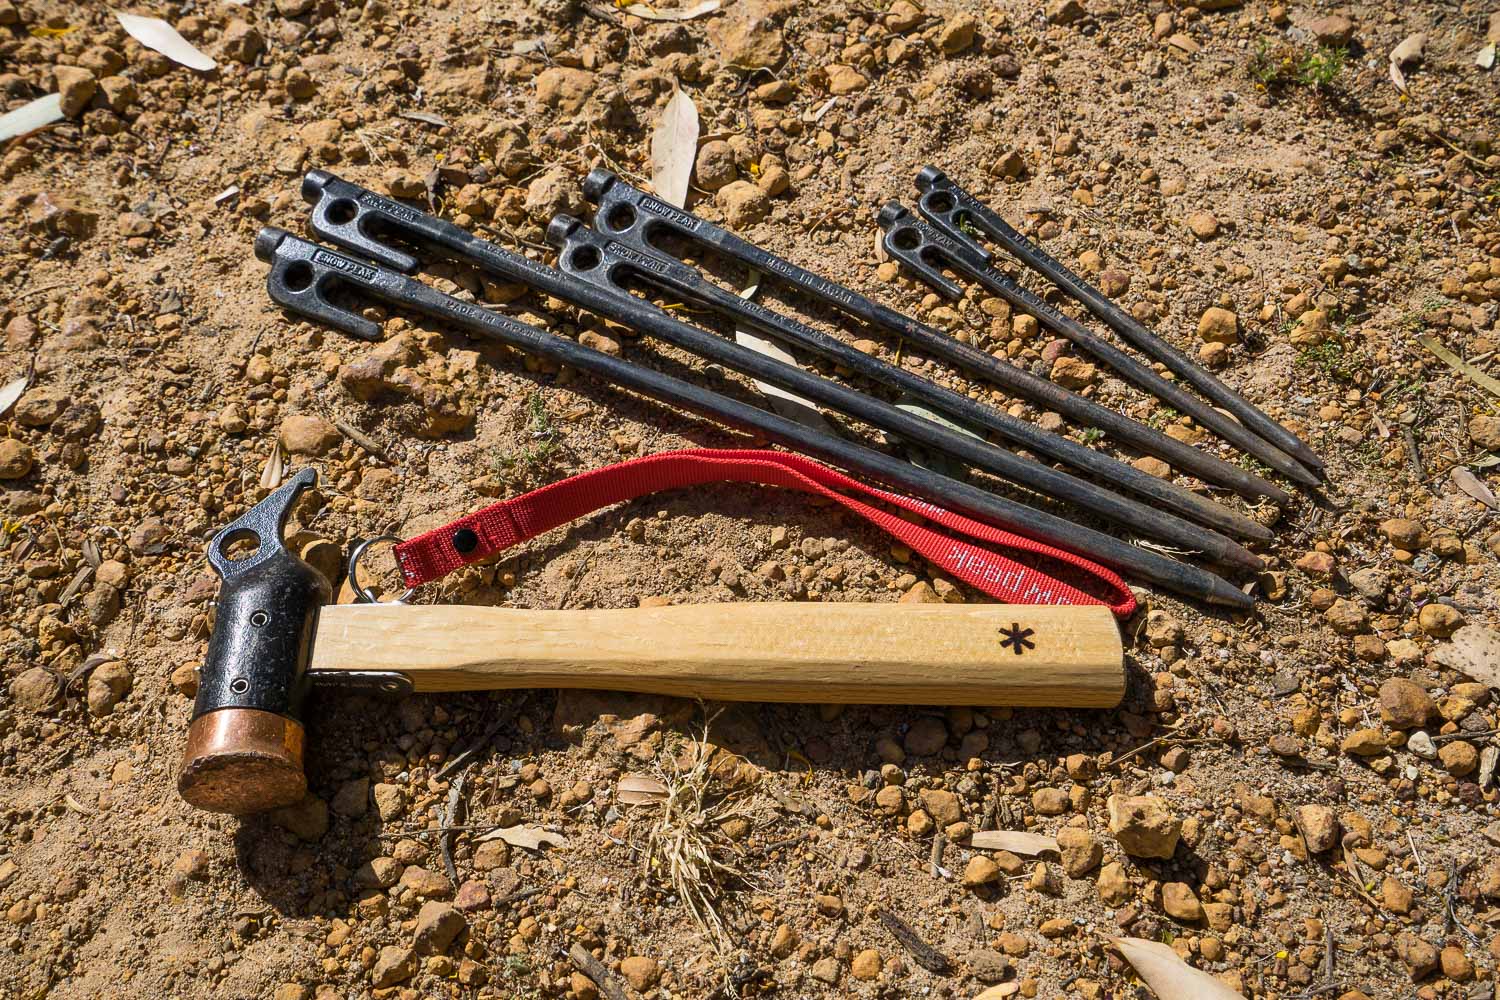 Snow Peak Hammer and Pegs • ADVENTURE CURATED